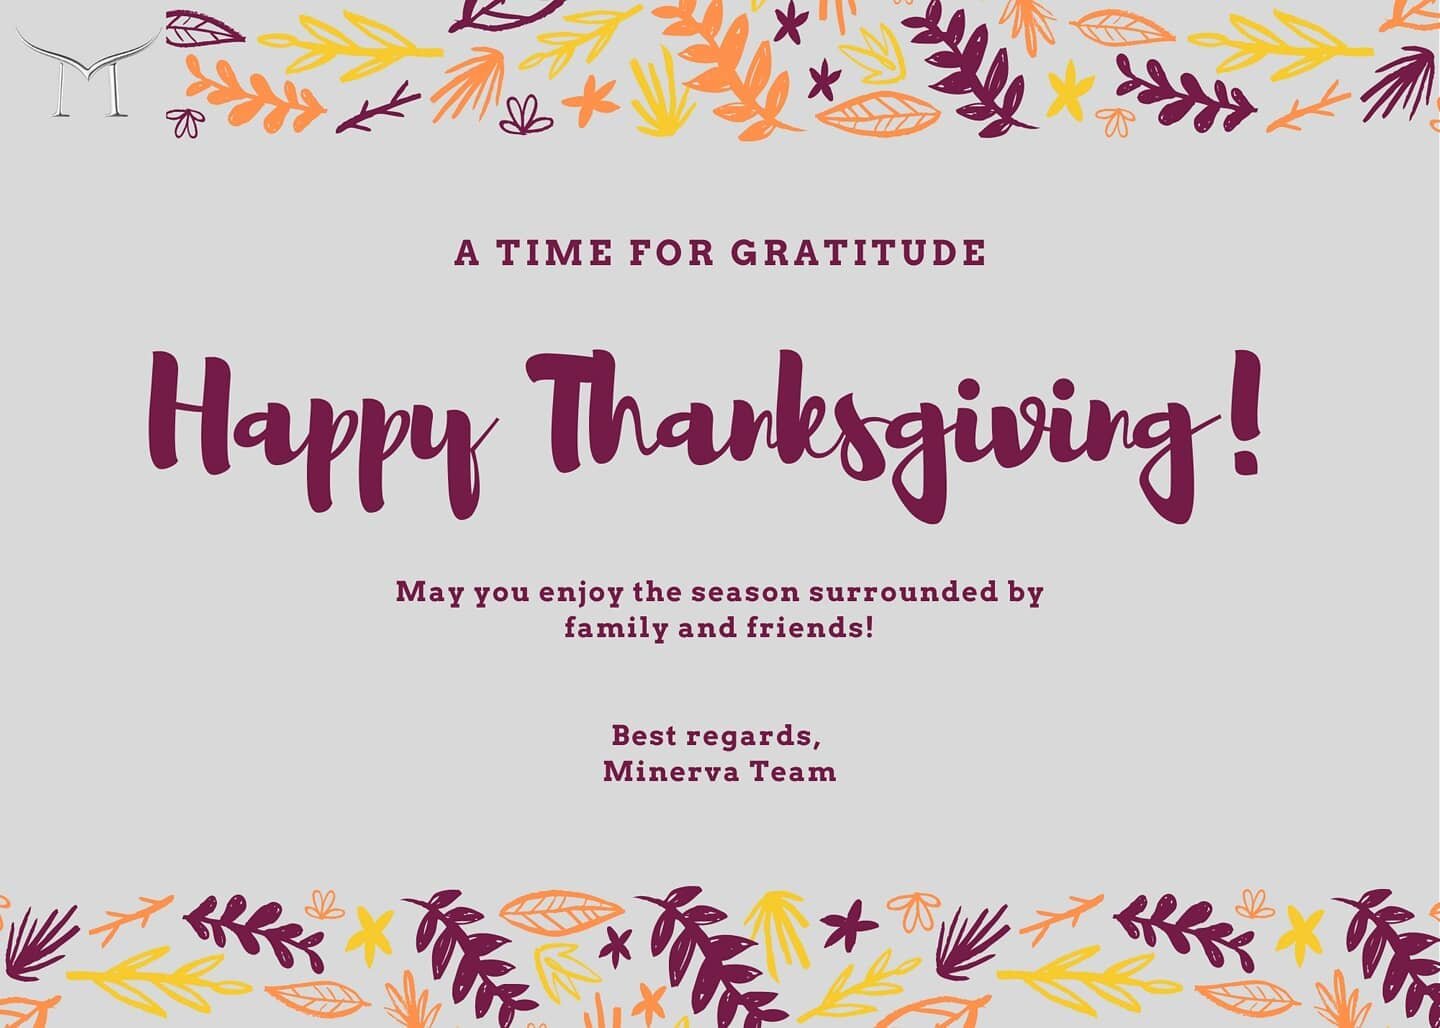 Happy Thanksgiving! 🙏
.
.
#minervafunds #thanksgiving #gratitude #friends #family #2020